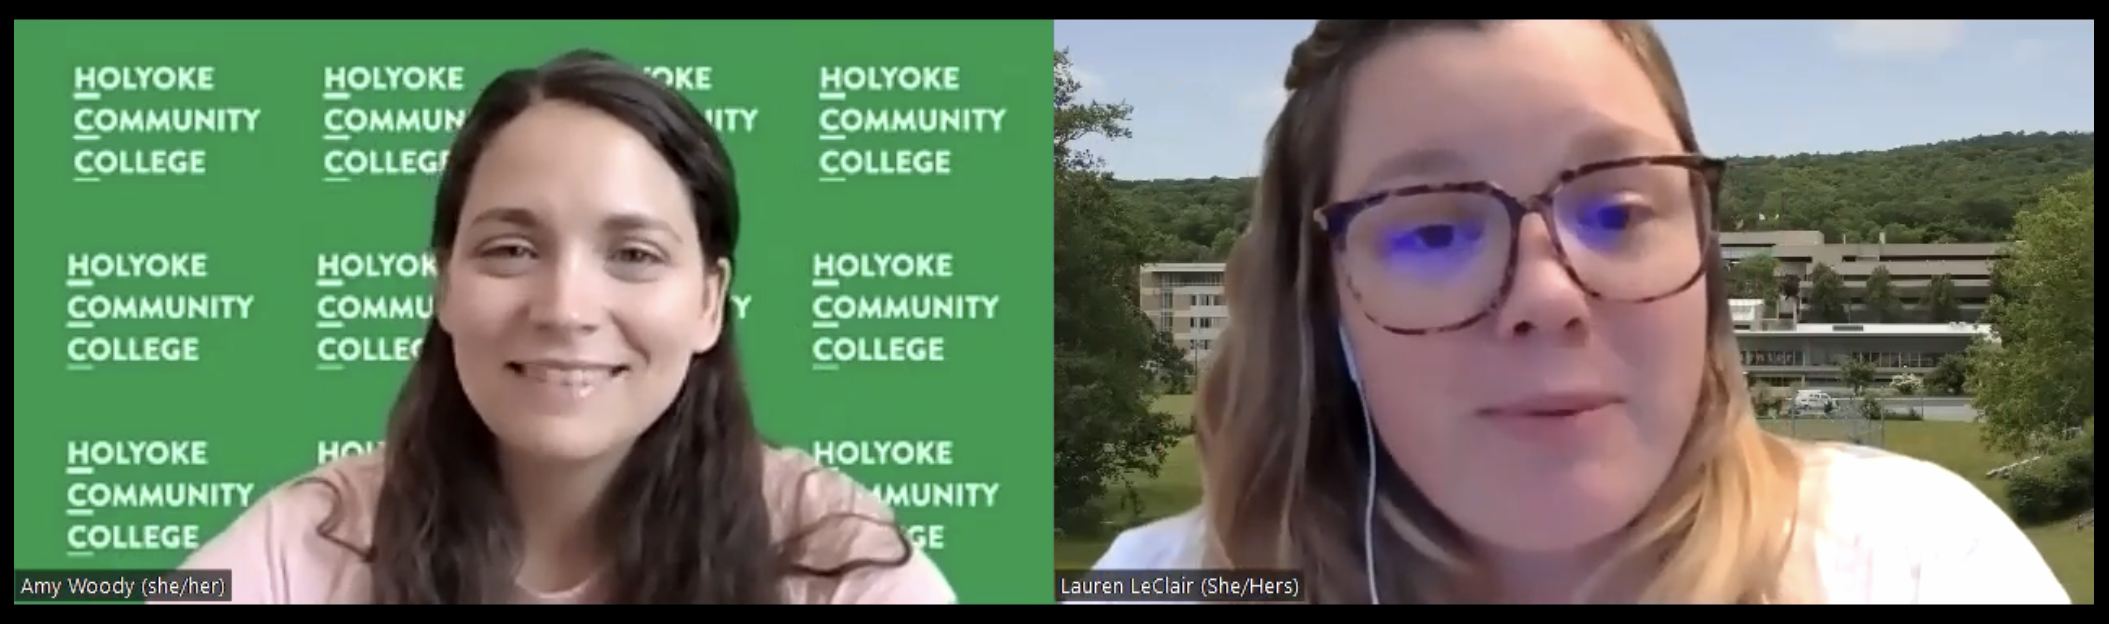 A Zoom recording photo of two people. On the left is Amy Woody (she/her), a white woman with brown hair in a pink shirt. Her background is green with white text that reads "Holyoke Community College" multiple times. On the right is Lauren LeClair (She/Hers), a white woman with brown and blonde hair wearing a pink shirt and glasses. Her image background is a picture of the Holyoke Community College campus.